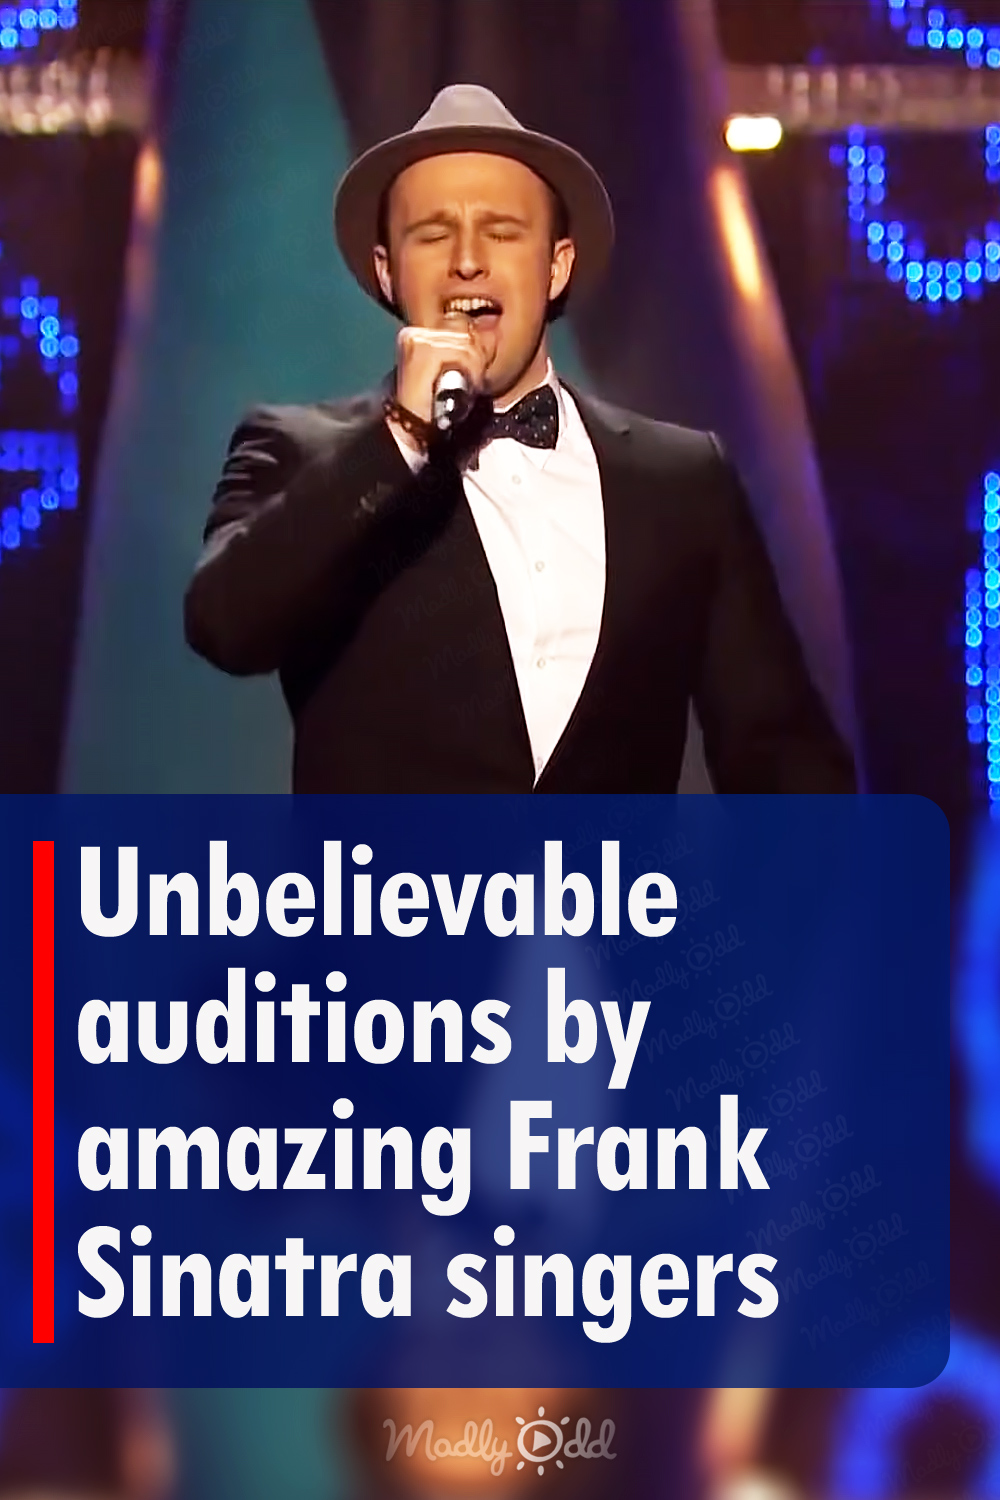 Unbelievable auditions by amazing Frank Sinatra singers